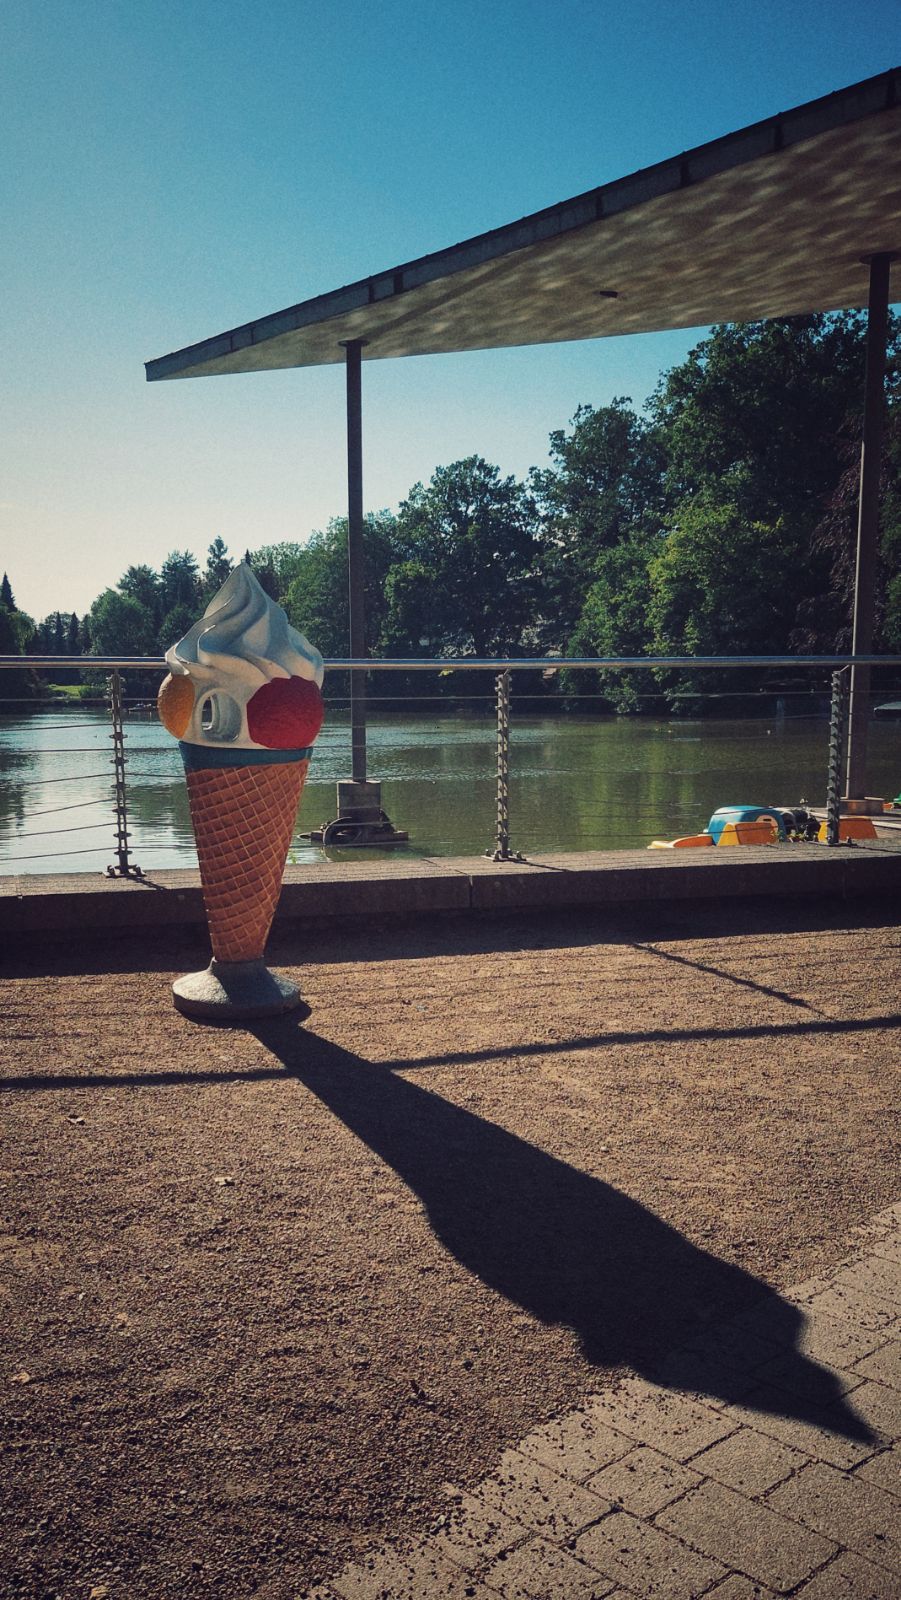 A large ice cream cone casting a long shadow next to a lake. There are small boats on the lake and a flat roof above.